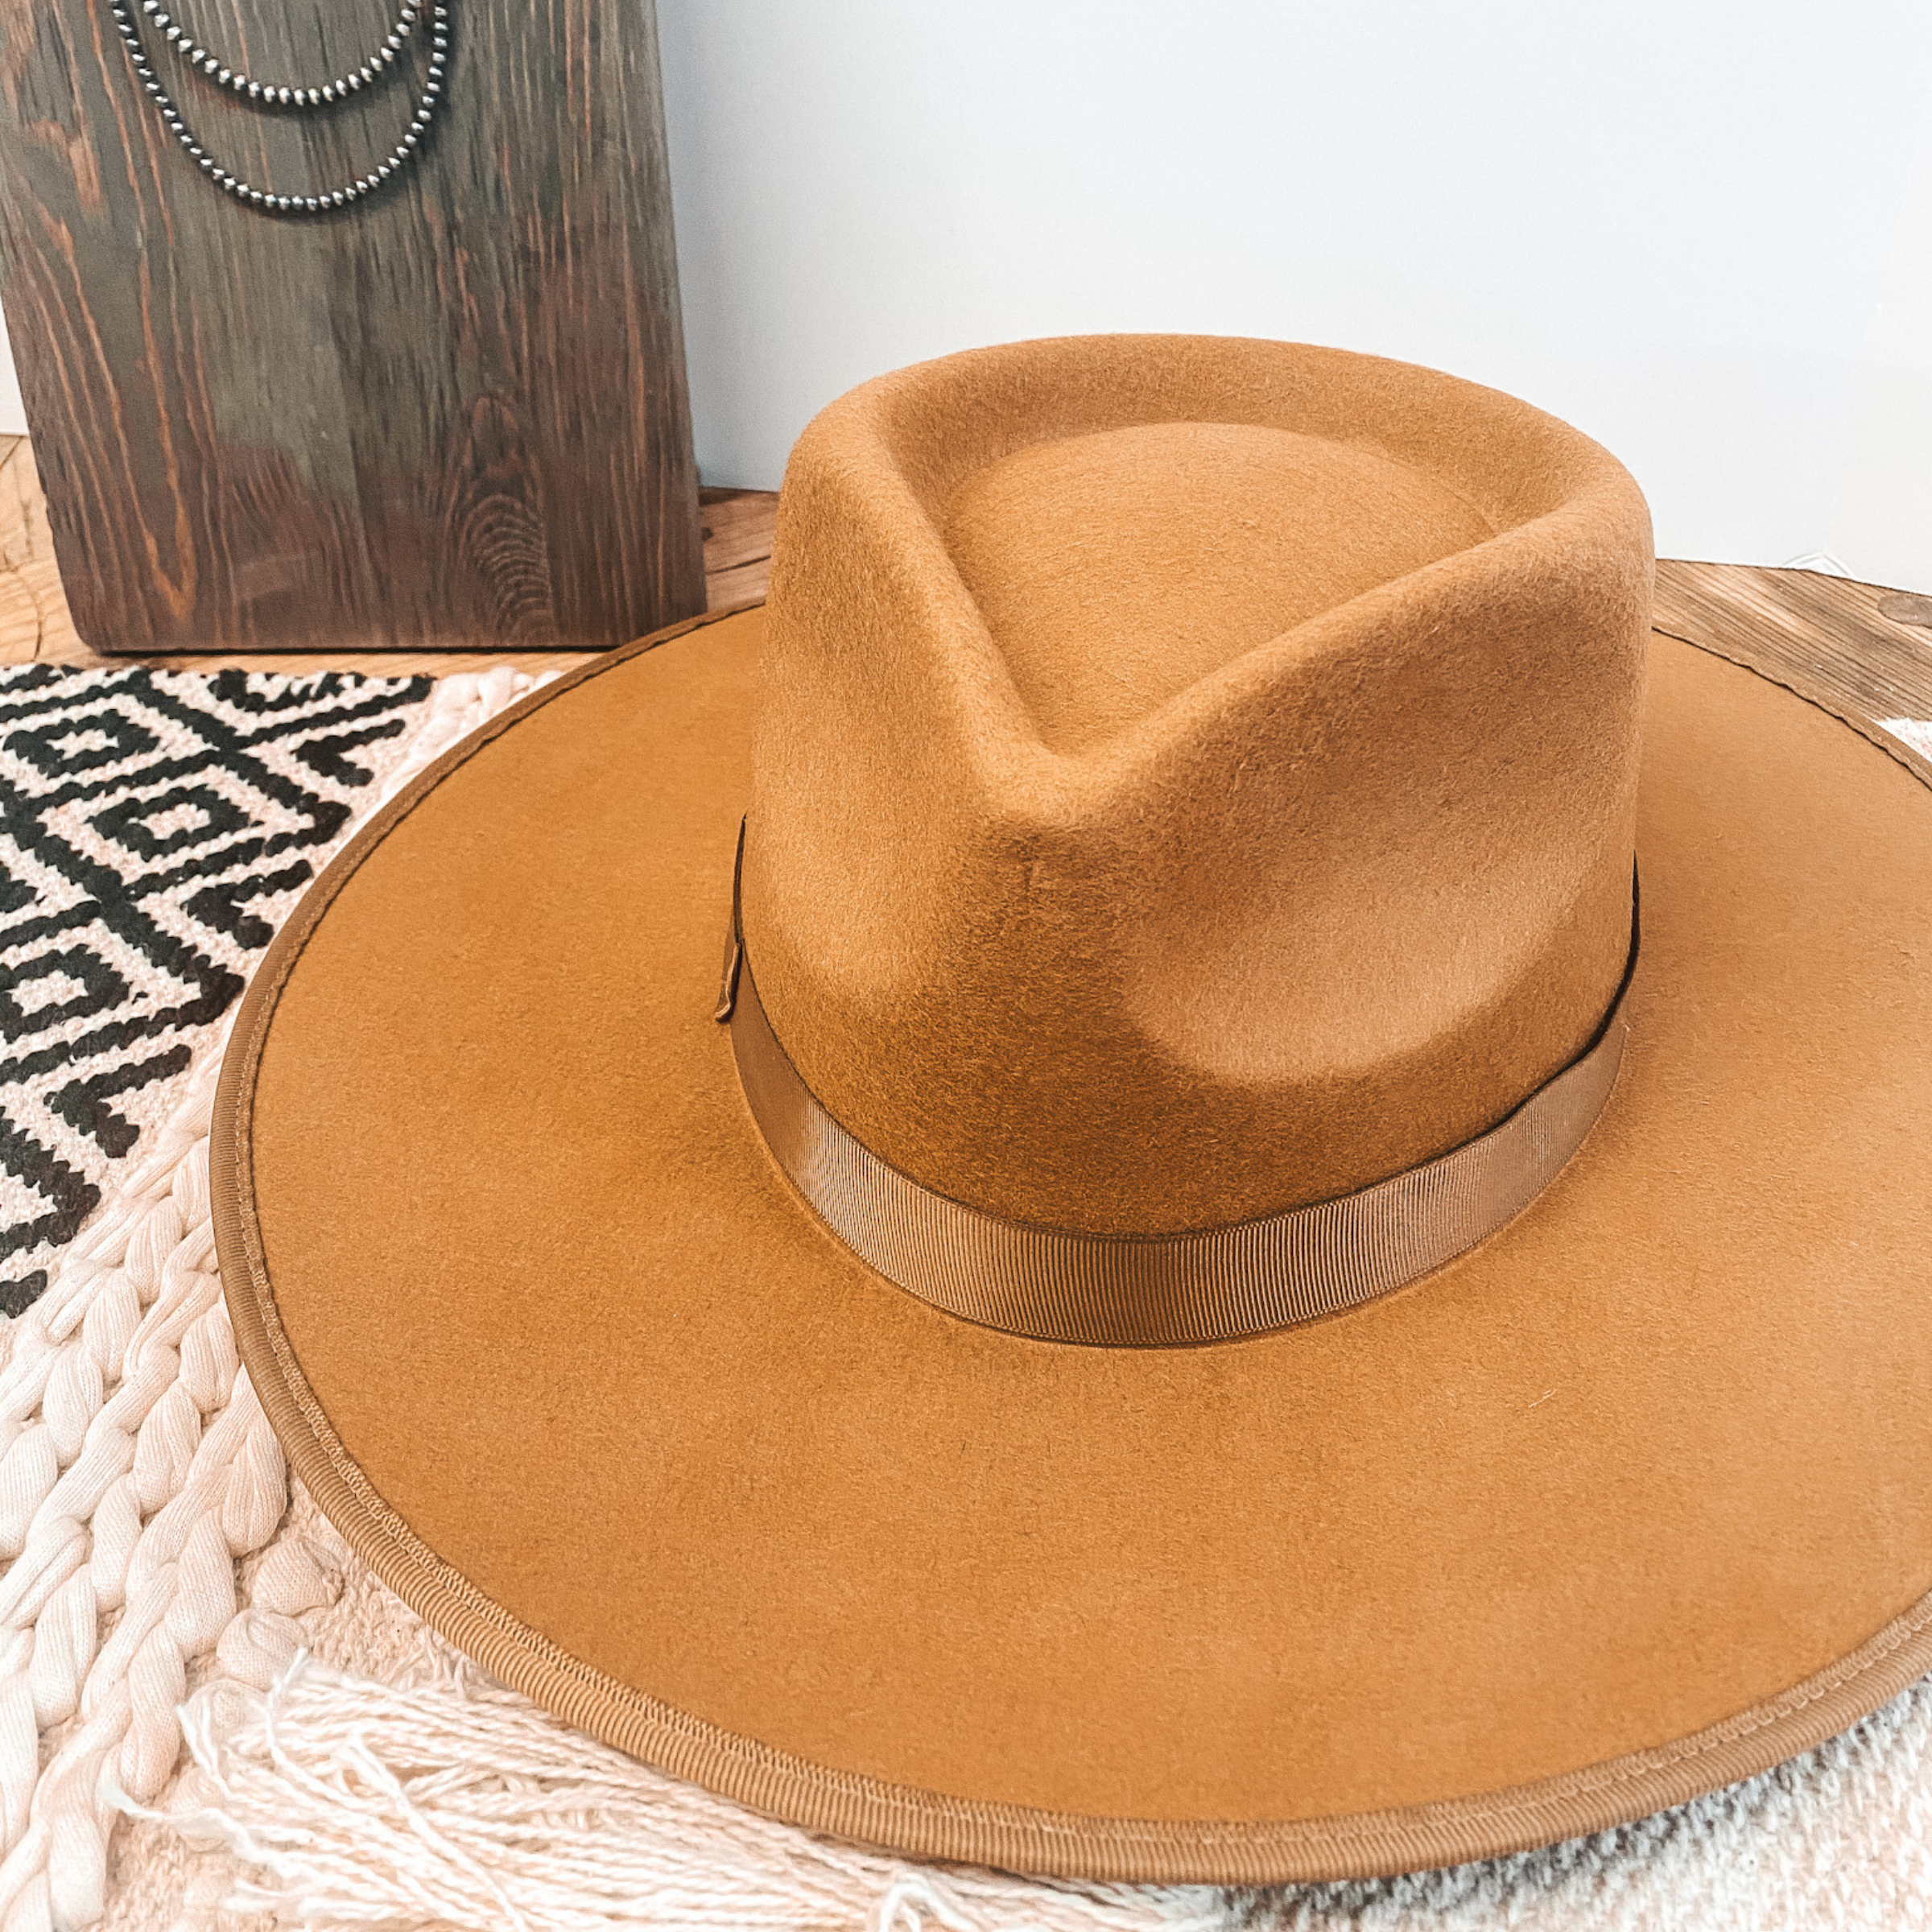 Ramblin' Road Ribbon Banded Rancher Hat in Tan - Giddy Up Glamour Boutique